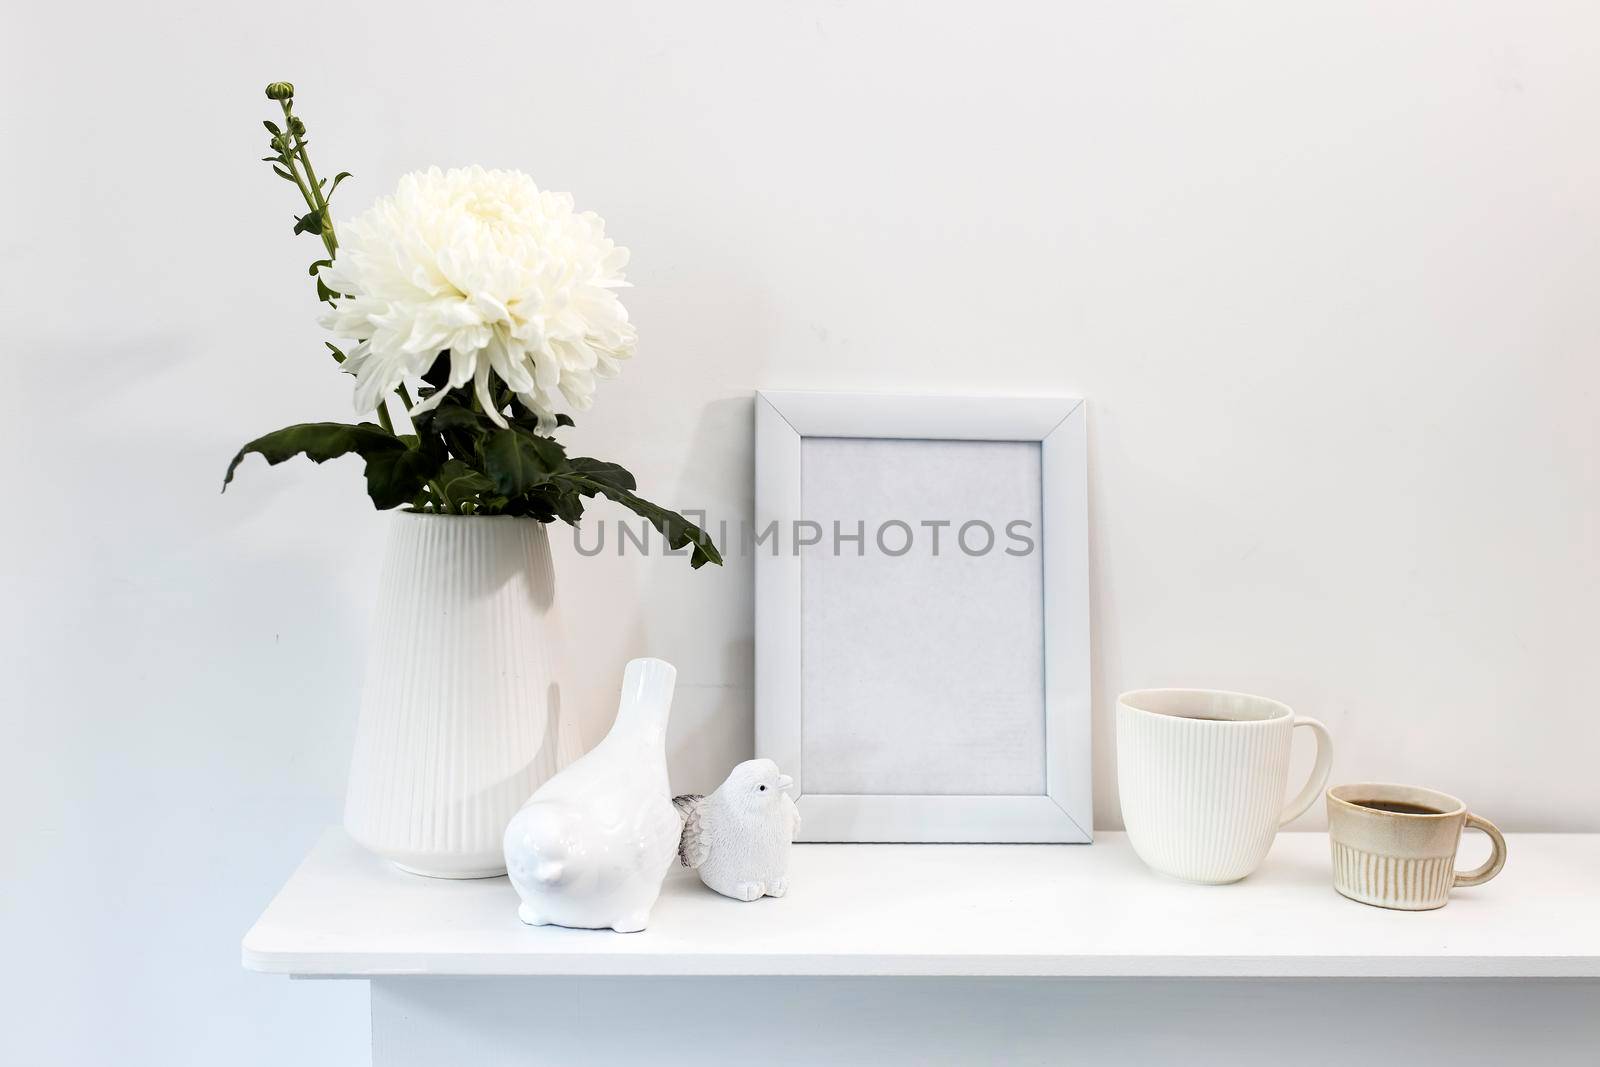 Large chrysanthemum in a glass vase. Photo frame with place for text, two corrugated cups with coffee and ceramic figurines of birds on the table. Office decoration. Copy space